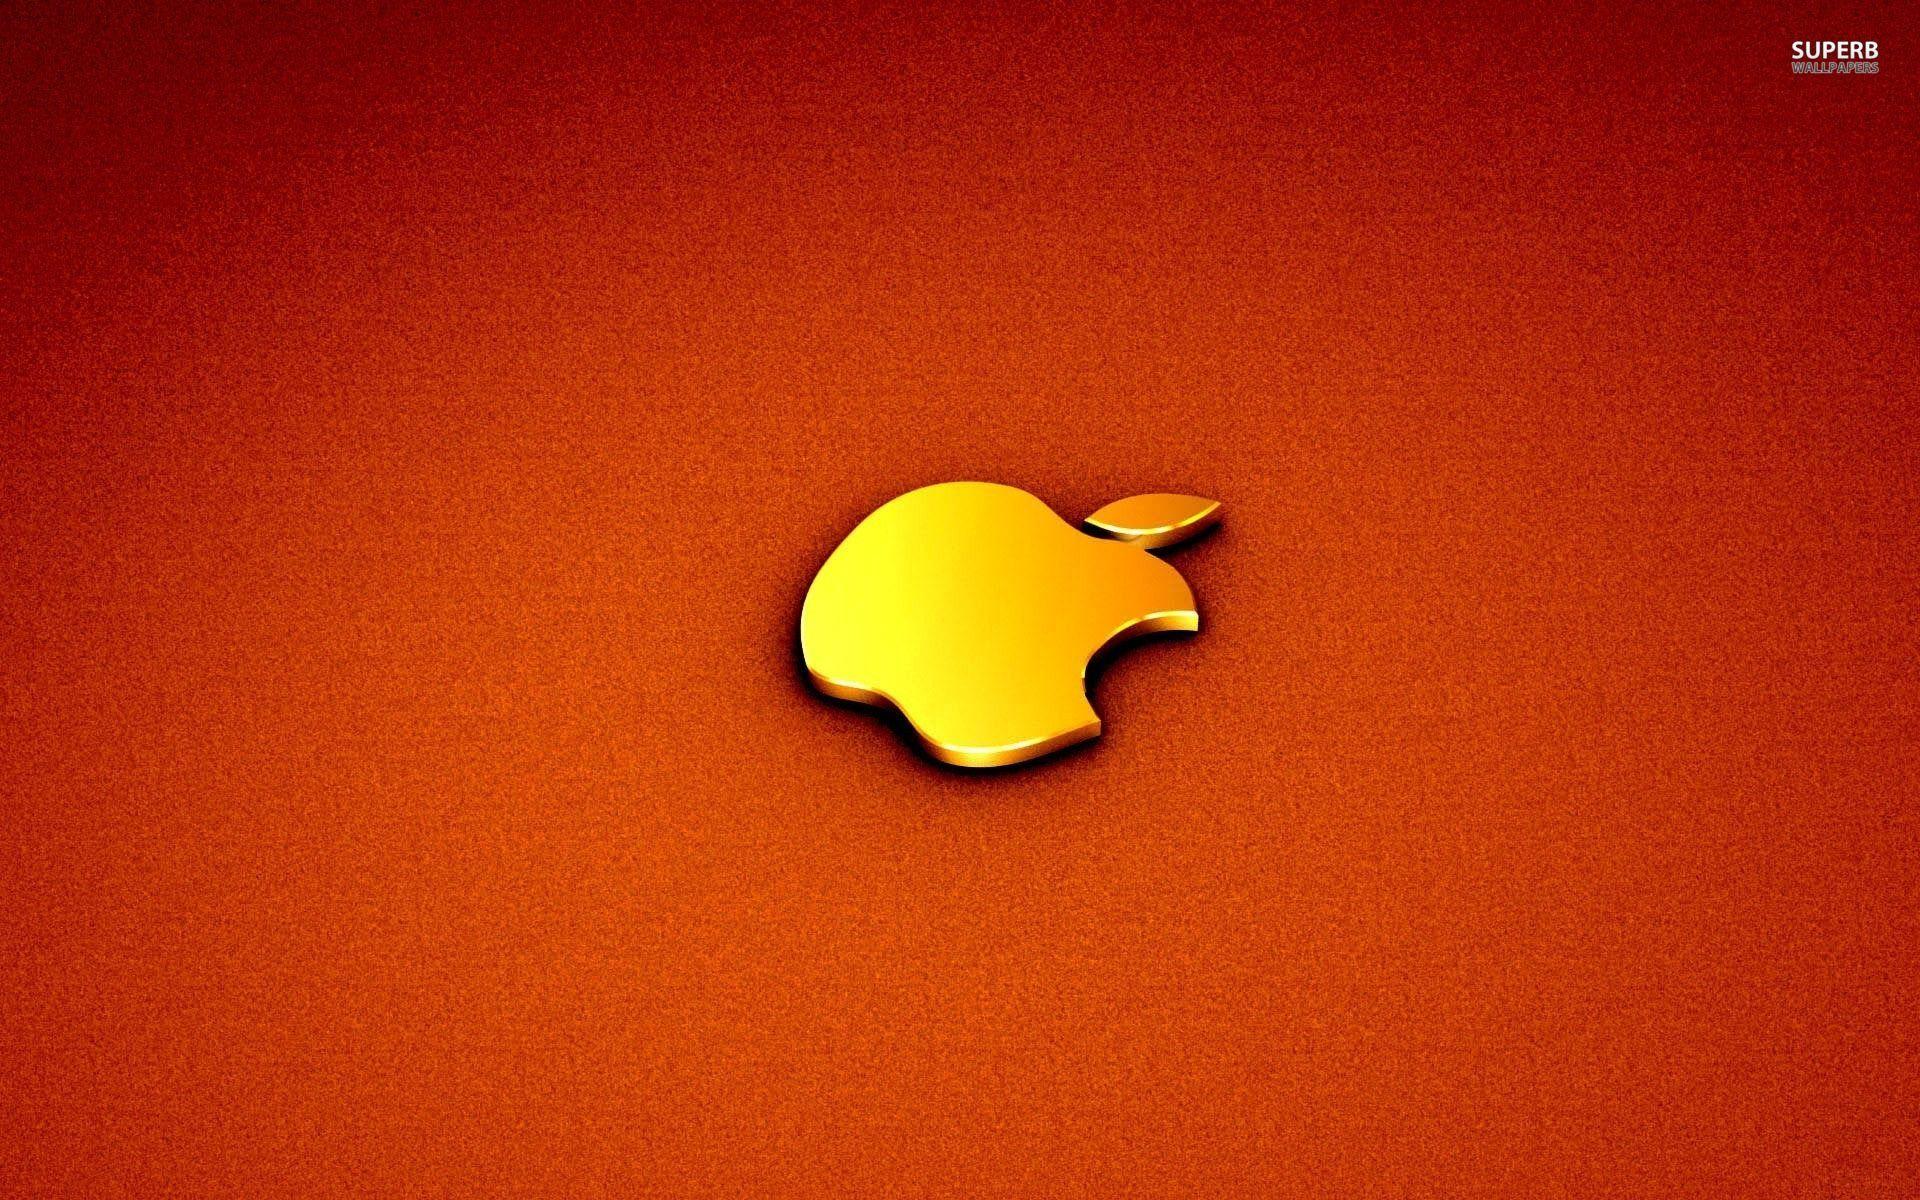 Red Apple Logo Wallpaper Image & Picture